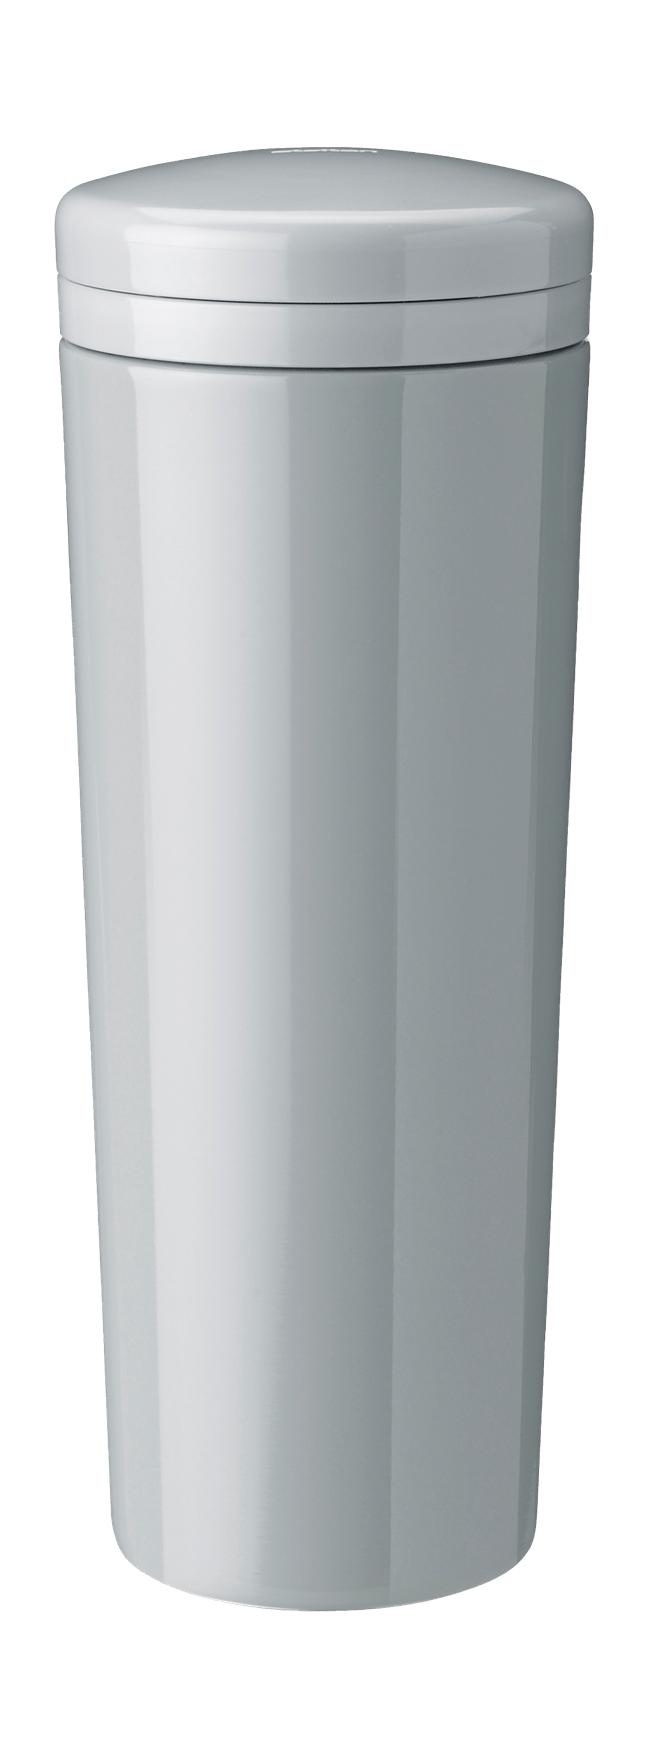 Stelton Carrie Thermos flaske 0,5 l, lysegrå